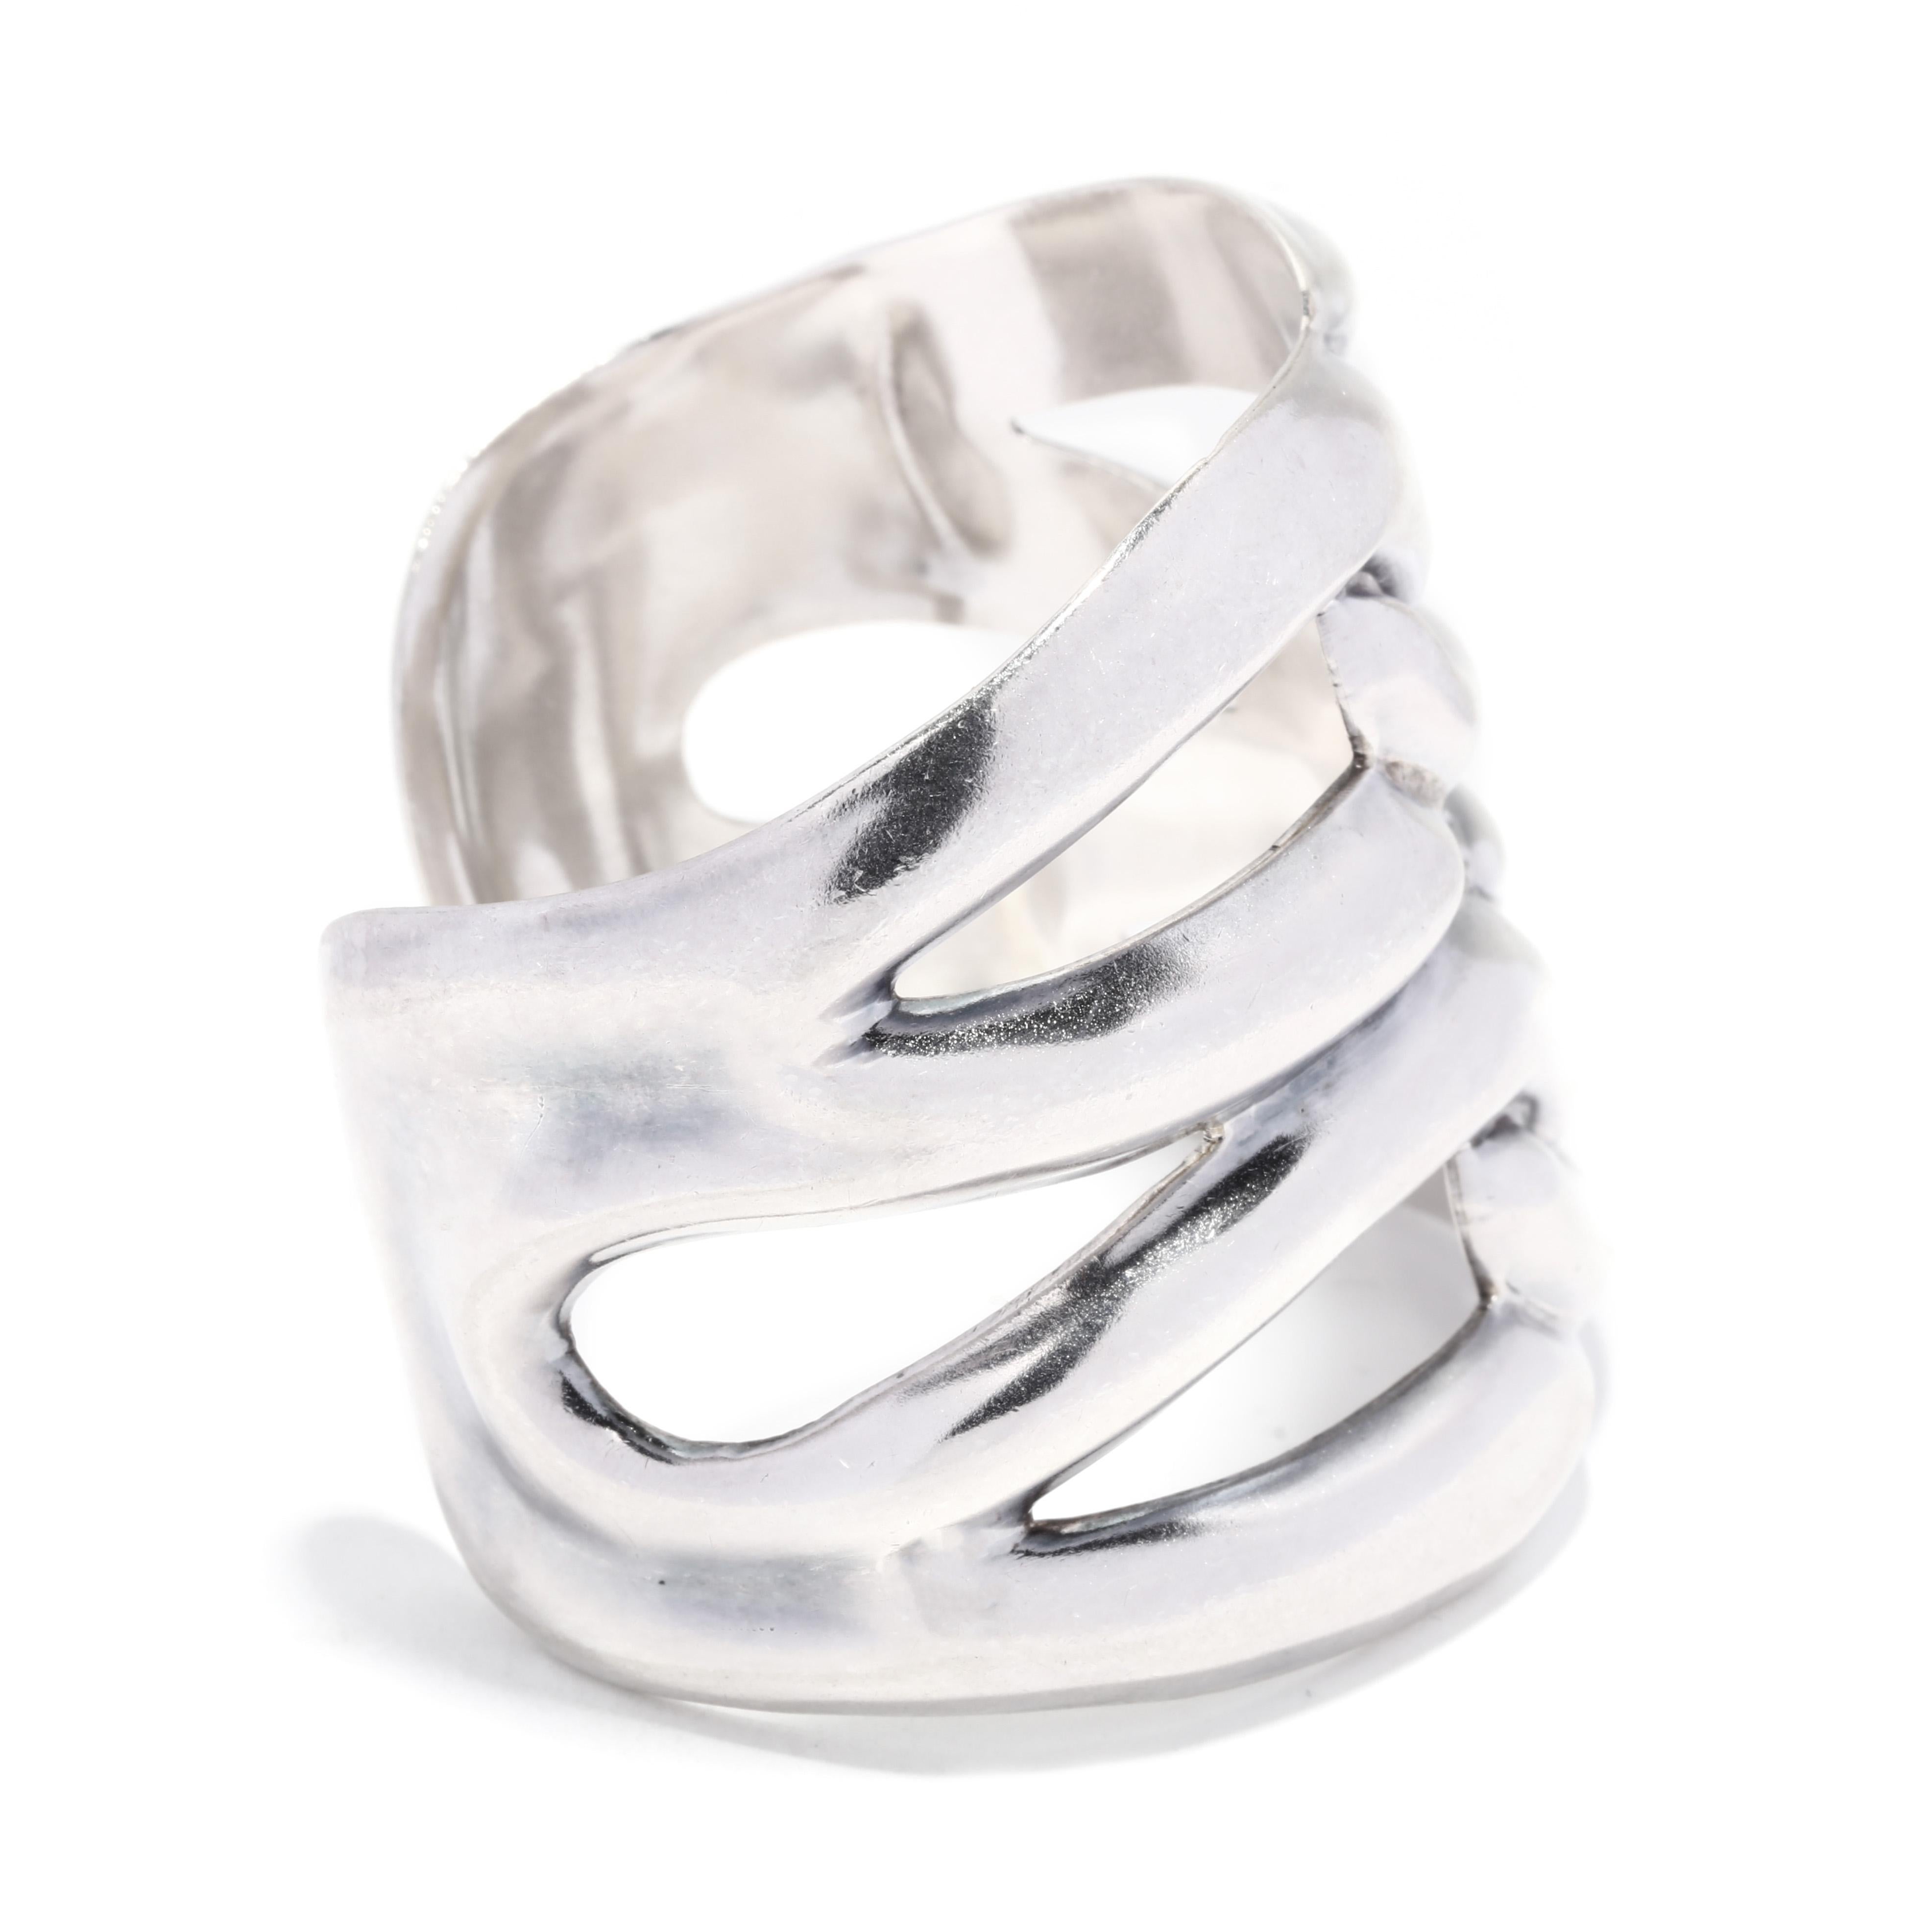 This handmade sterling silver cuff bracelet is the perfect way to add style and sophistication to any ensemble. Crafted by skilled artisans in Mexico, this elegant cuff boasts a unique knot design and measures 6.25 inches in length. The wide silver